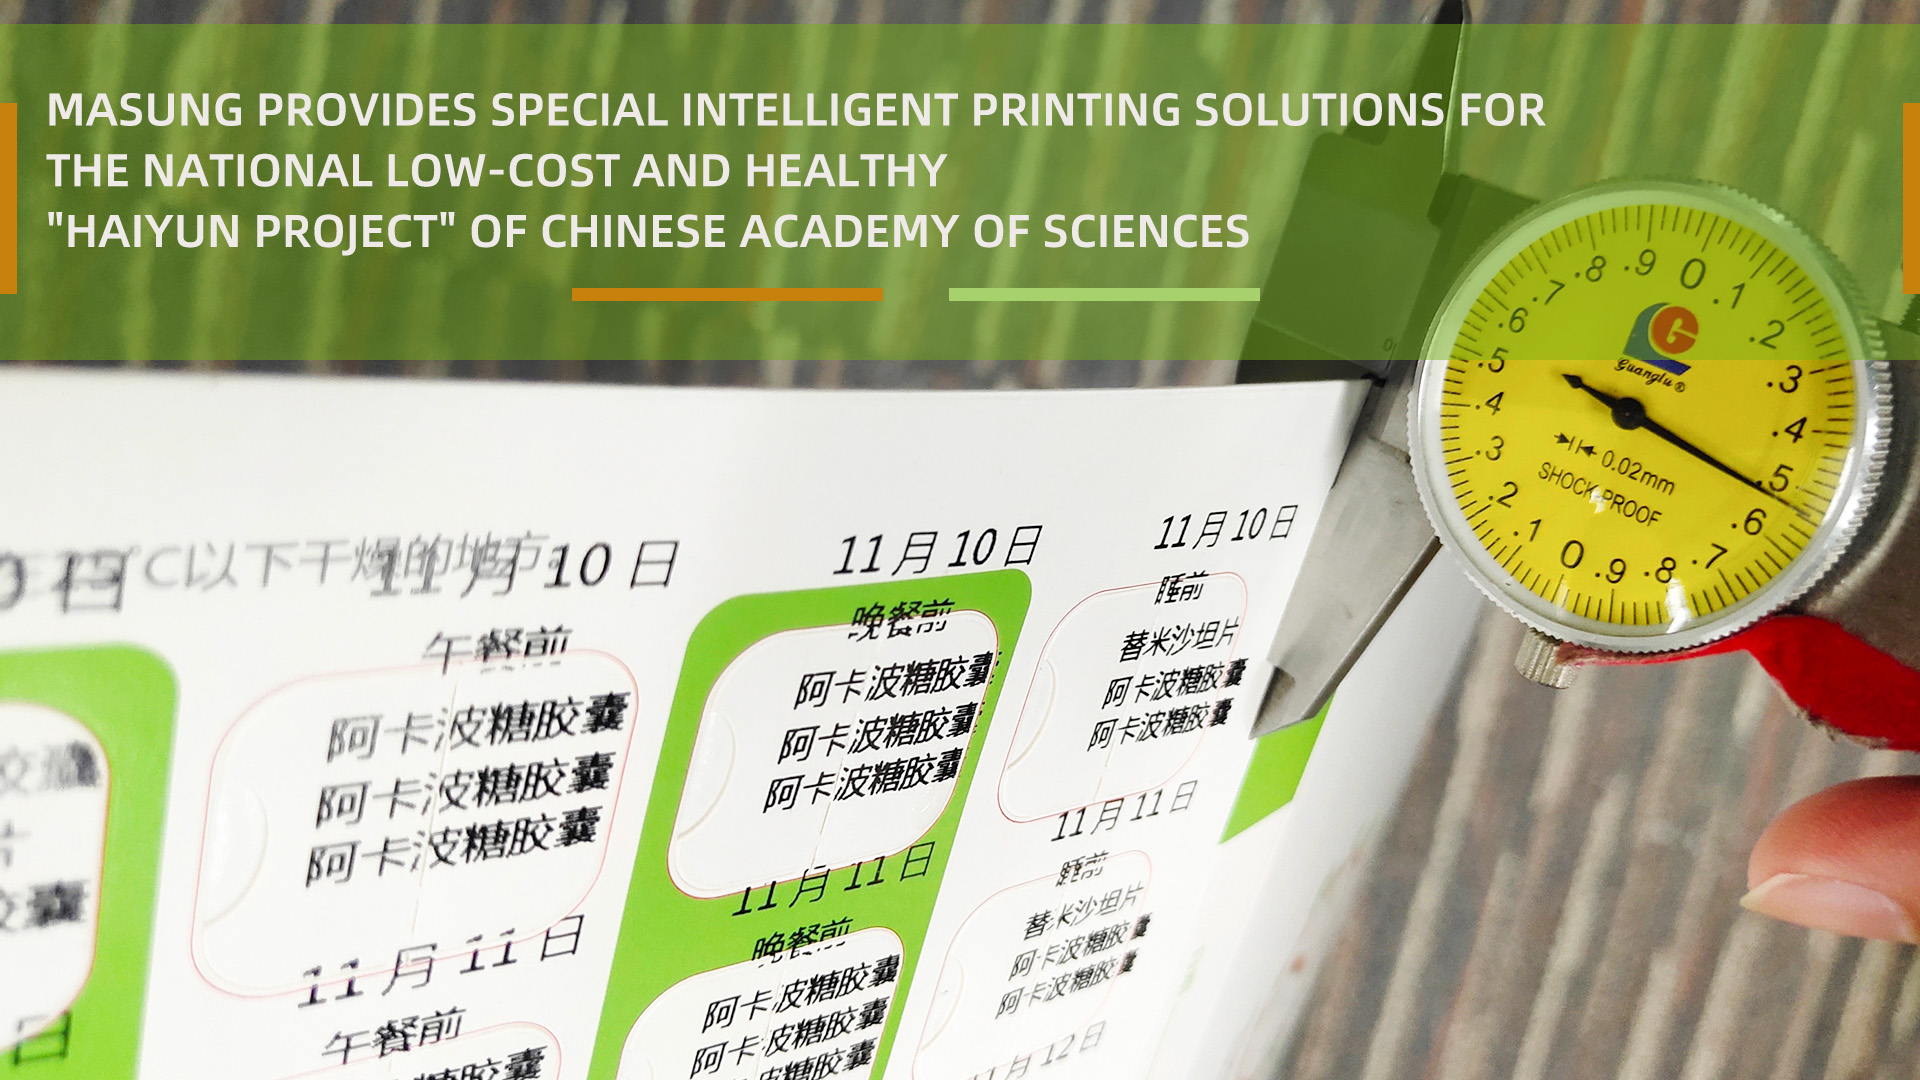 Masung provides special intelligent printing solutions for the national low-cost and healthy "Haiyun Project" of Chinese Academy of Sciences